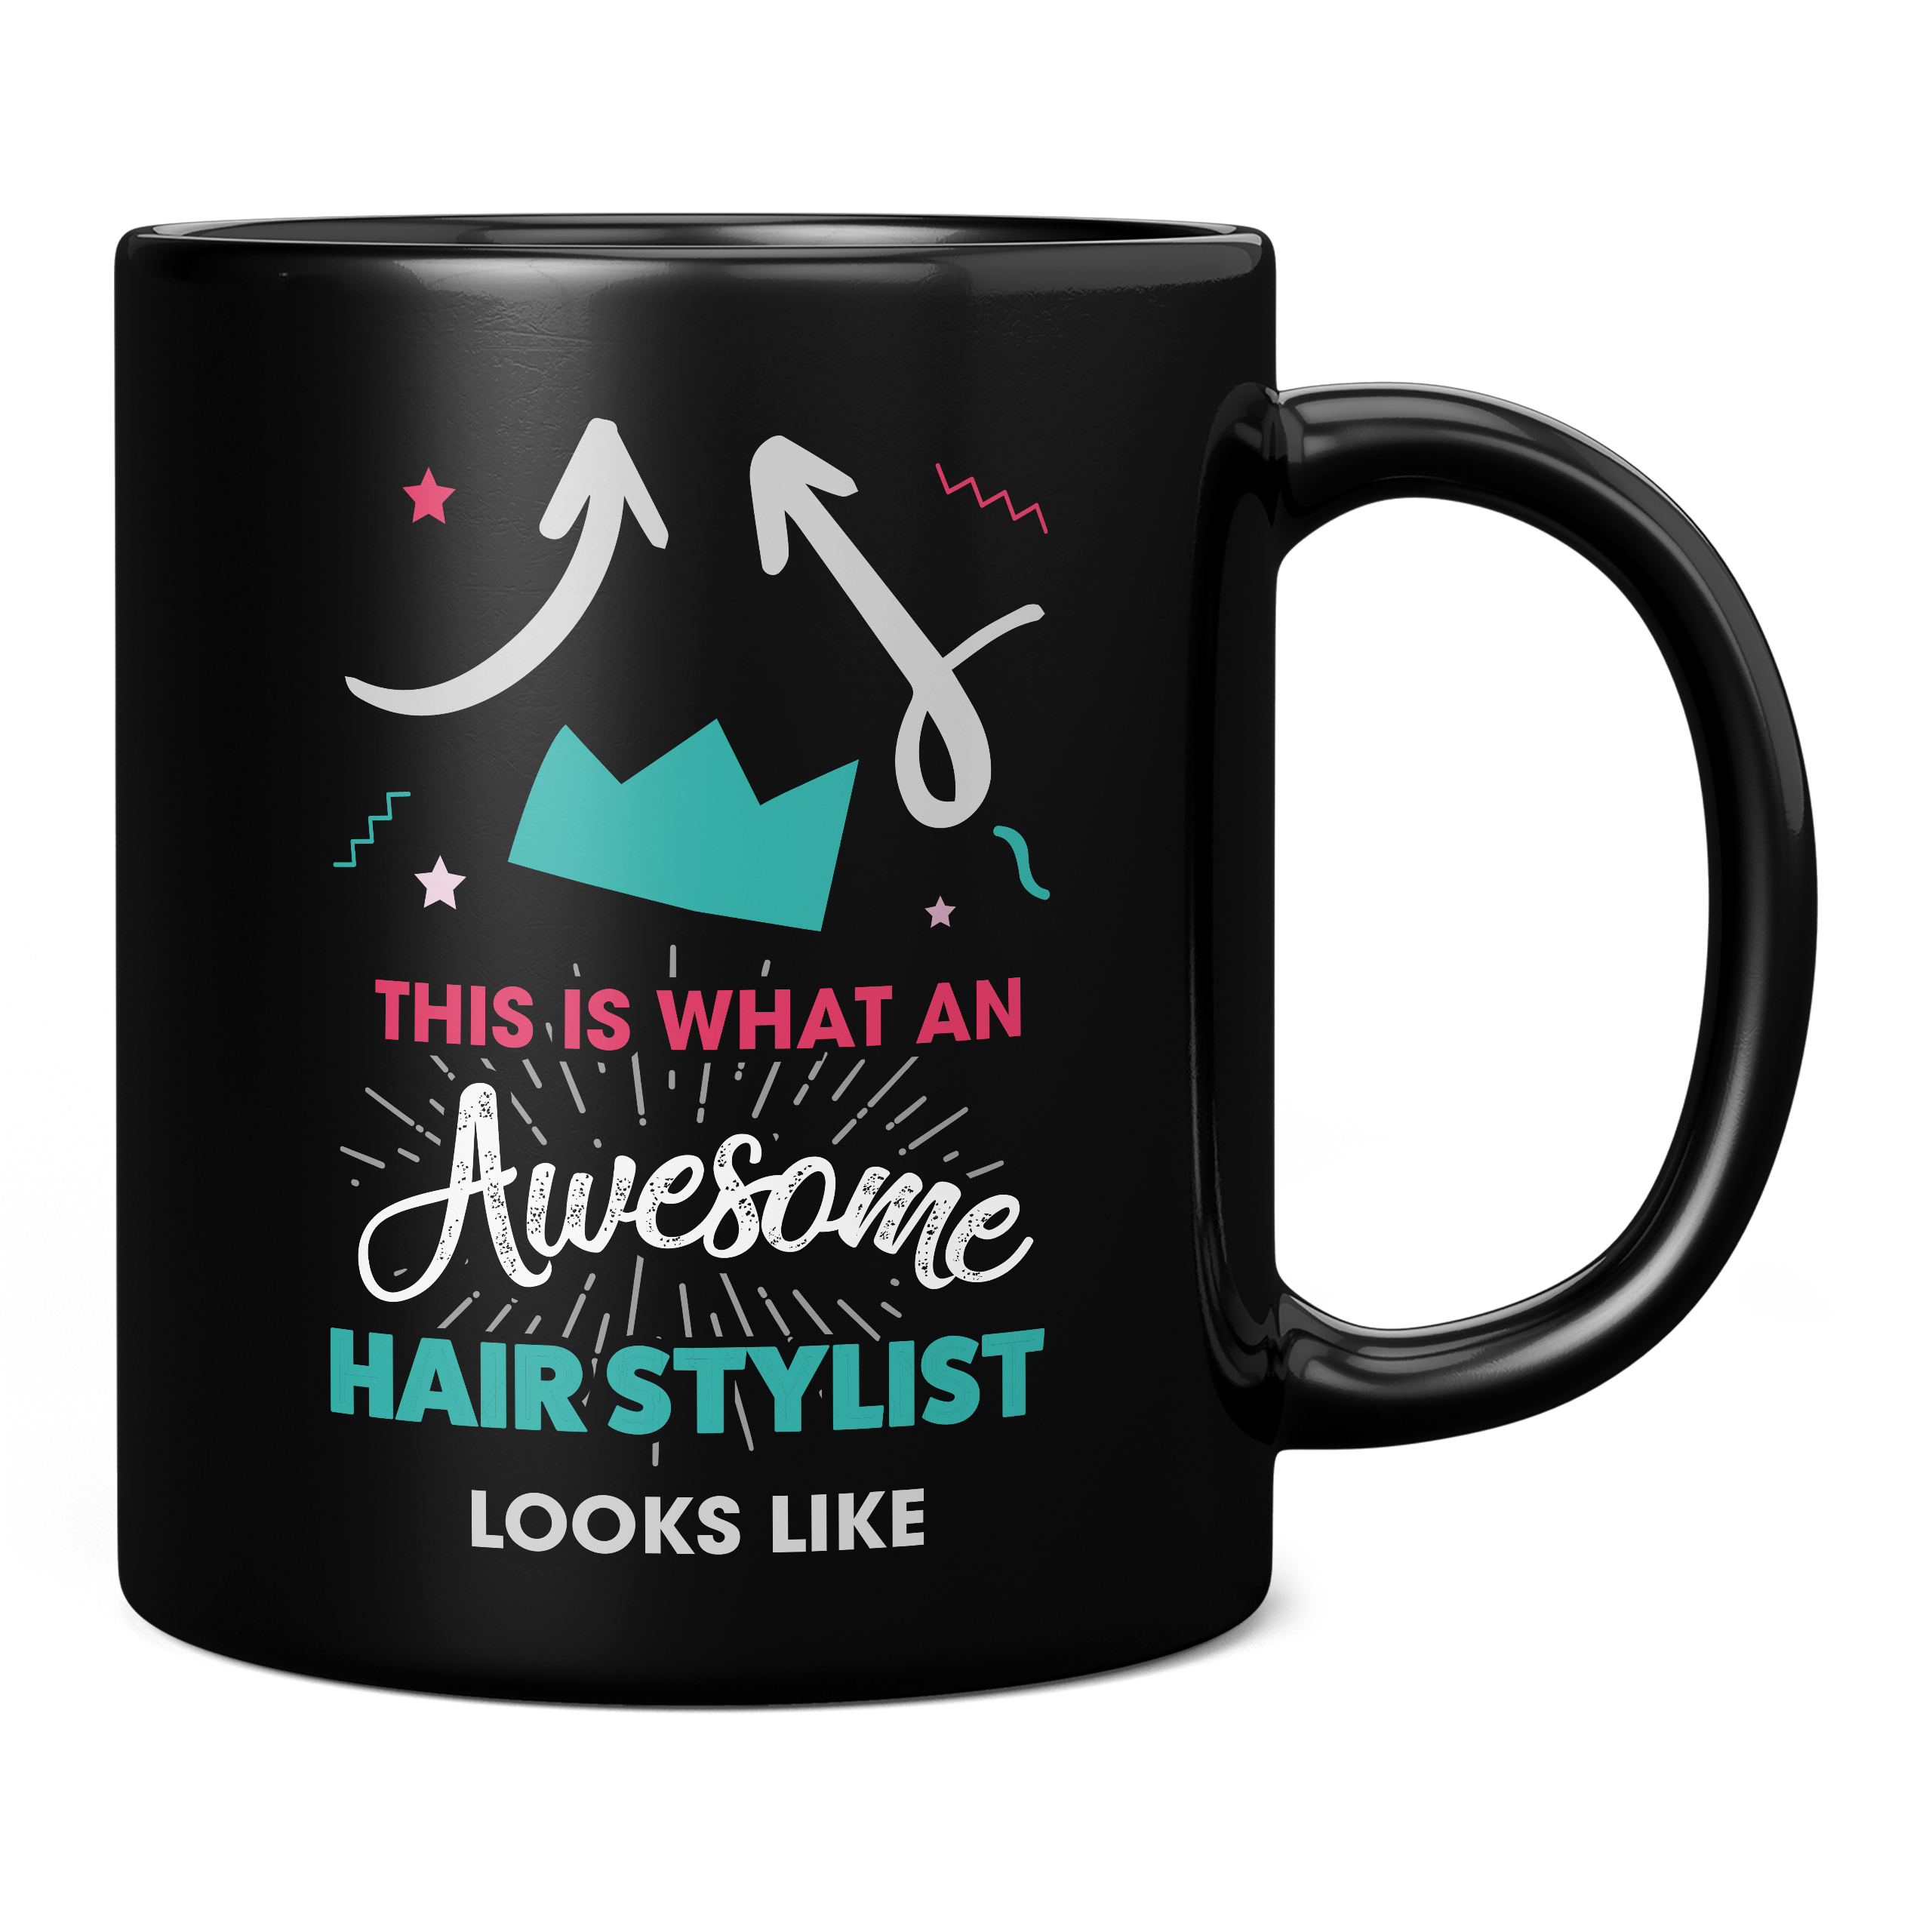 THIS IS WHAT AN AWESOME HAIR STYLIST LOOKS LIKE 11OZ NOVELTY MUG